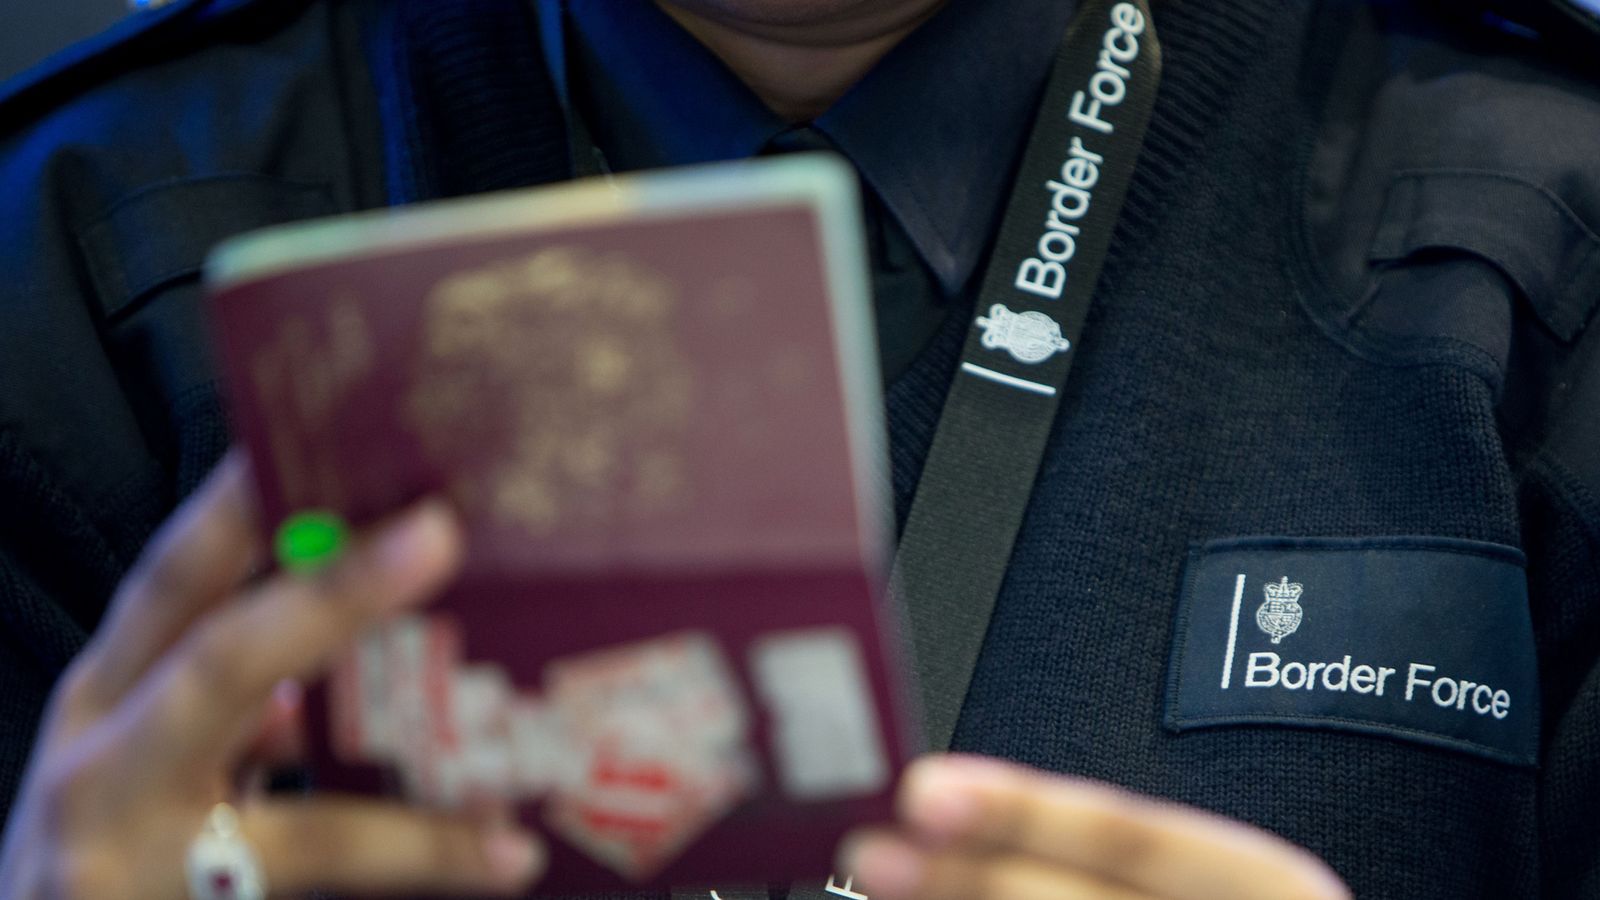 Thousands of flights could be delayed as Border Force workers launch strike action